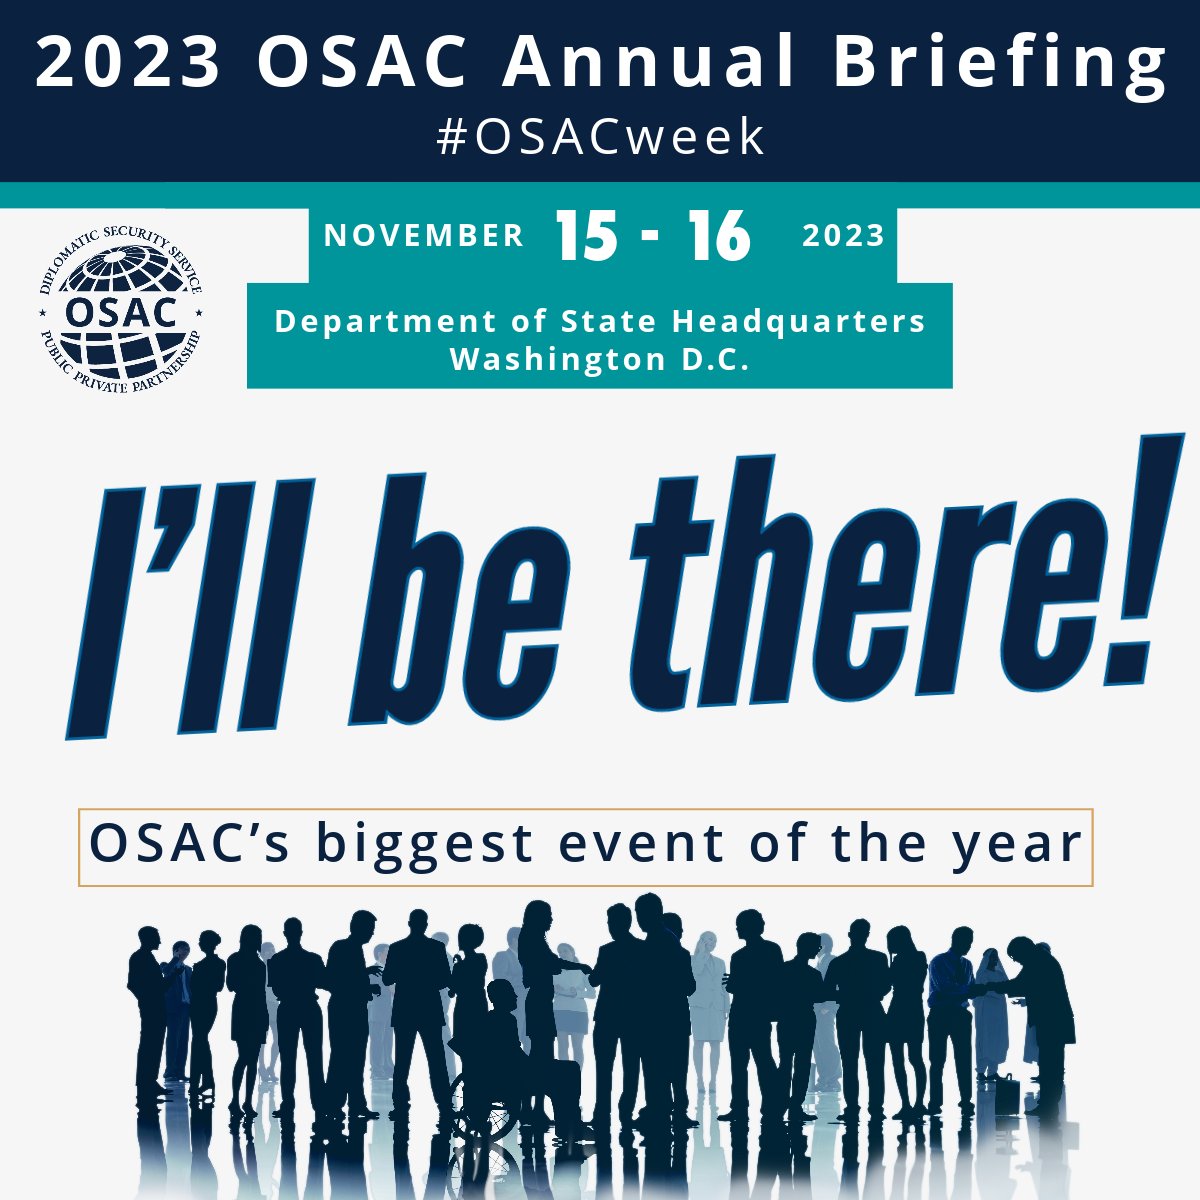 Making plans to visit #OSAC next week? Want to discuss the safety of your employees when they travel? Plan to speak with our founder & CEO, contact us today.#travelriskmanagement